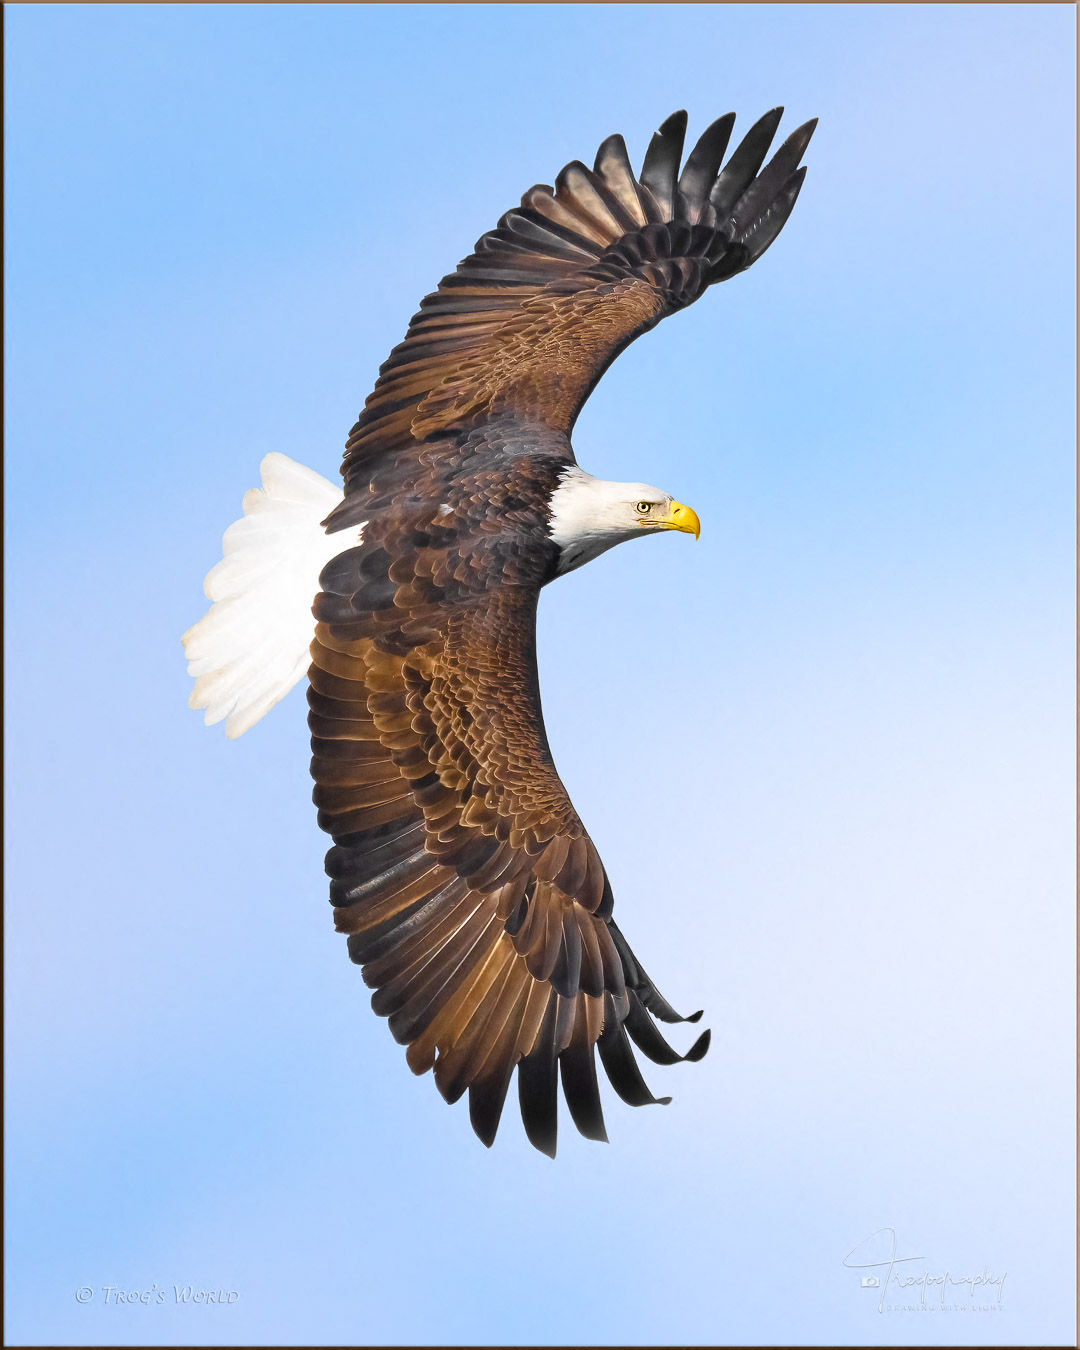 American Bald Eagle banks to the north